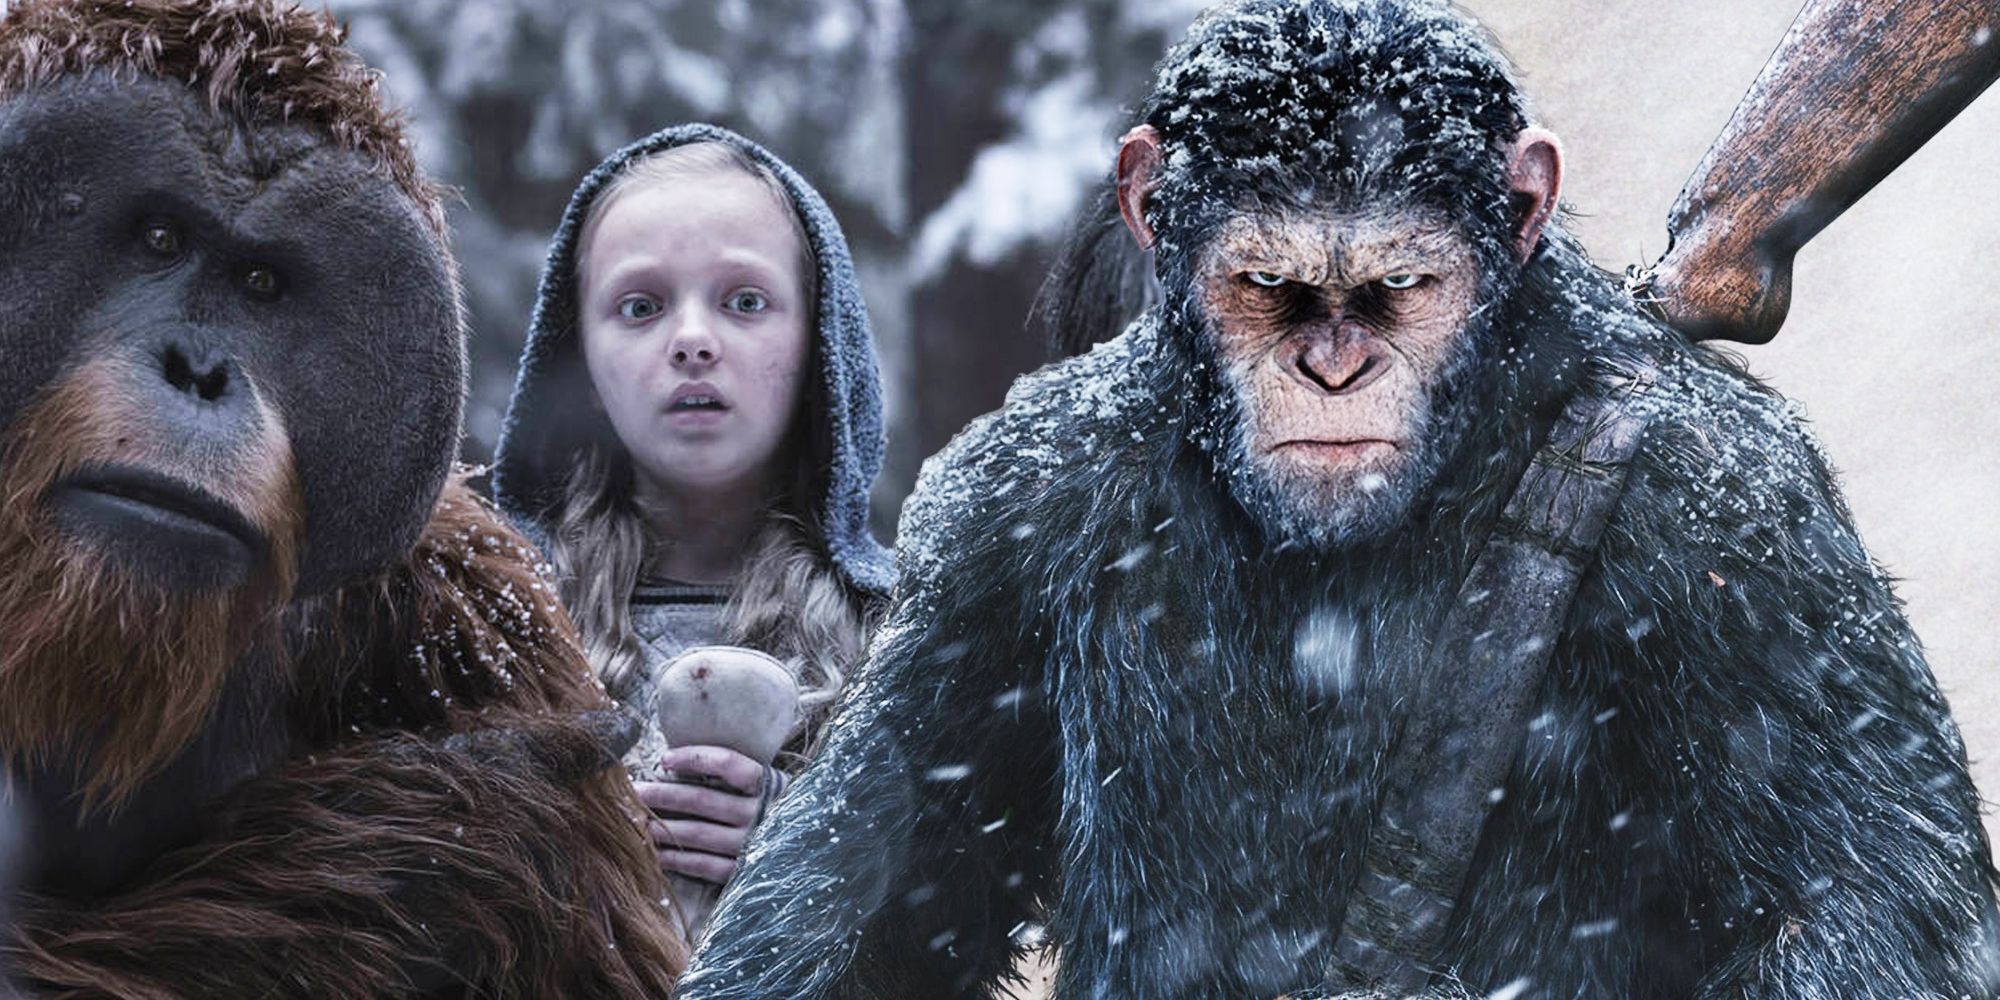 Caesar and Nova in Planet of the Apes